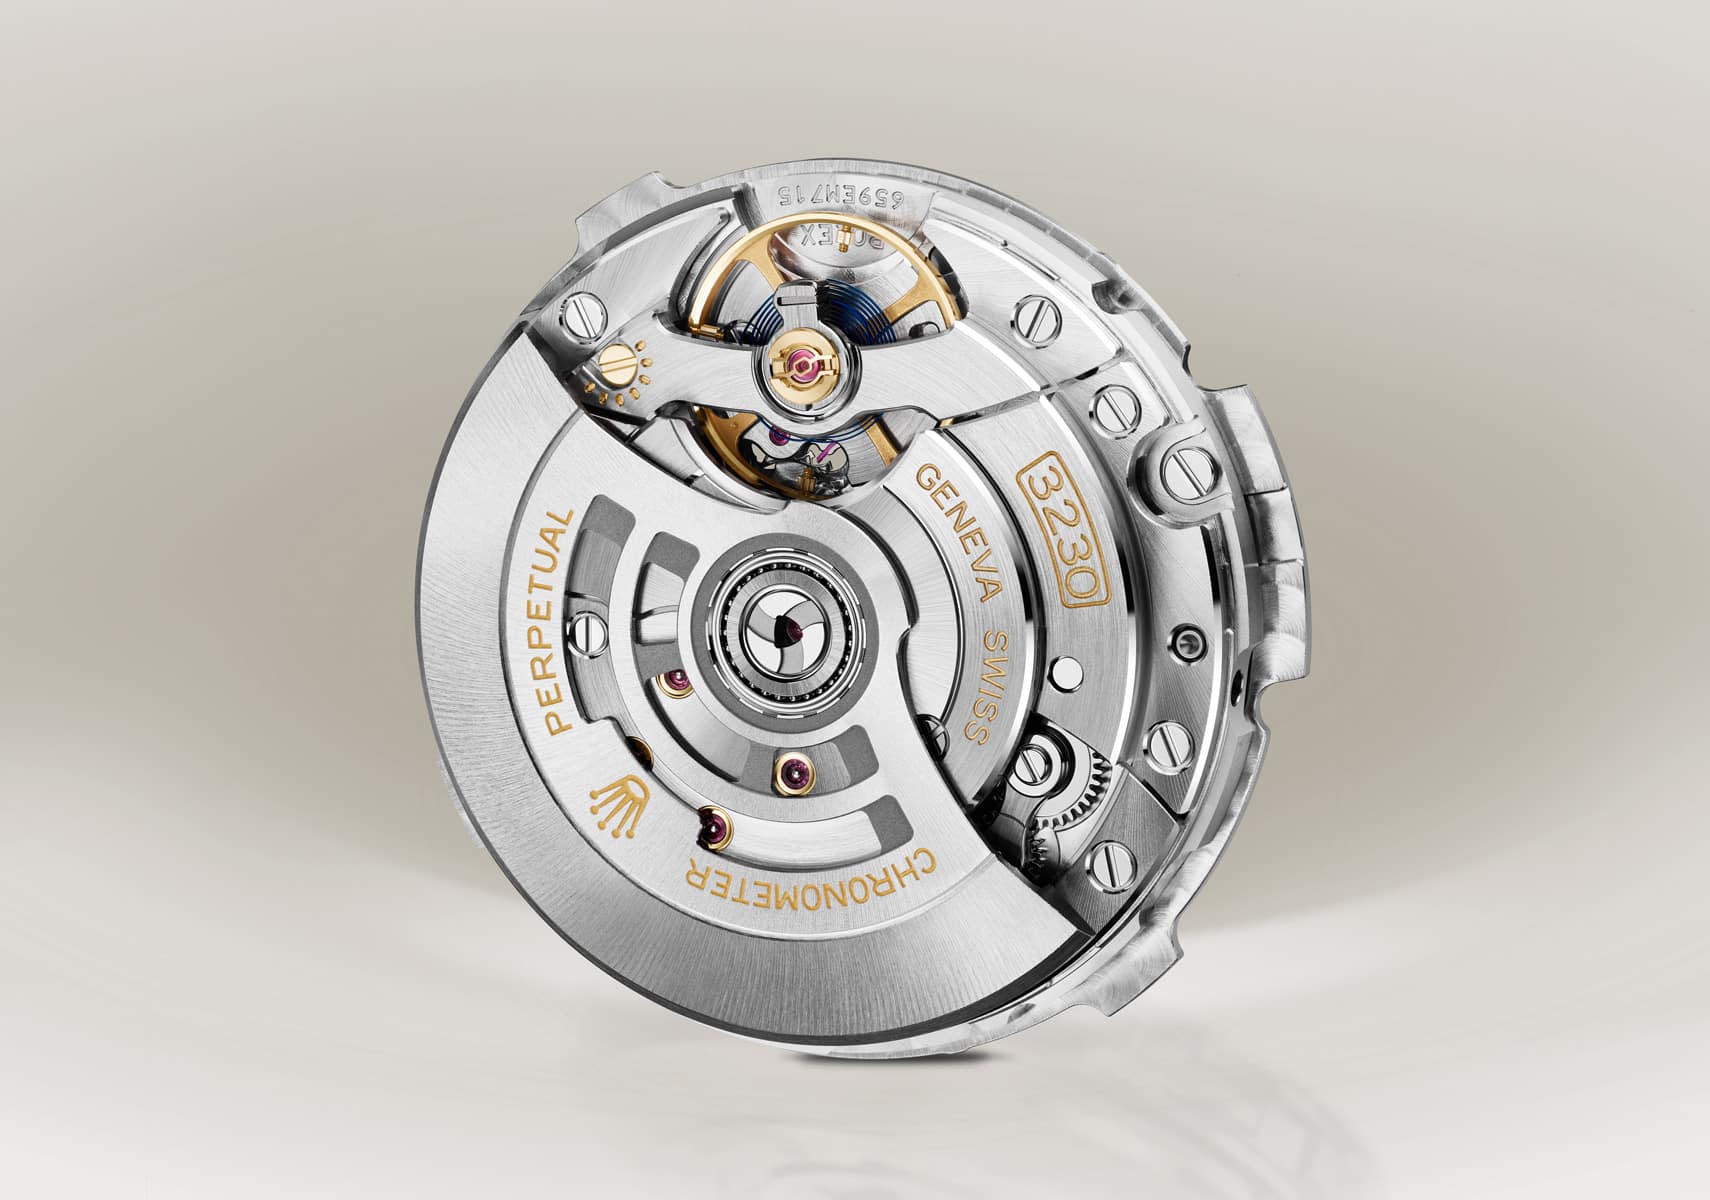 07_Oyster_Perpetual_The_essence_of_the_oyster_image_03_desktop_1710x1200